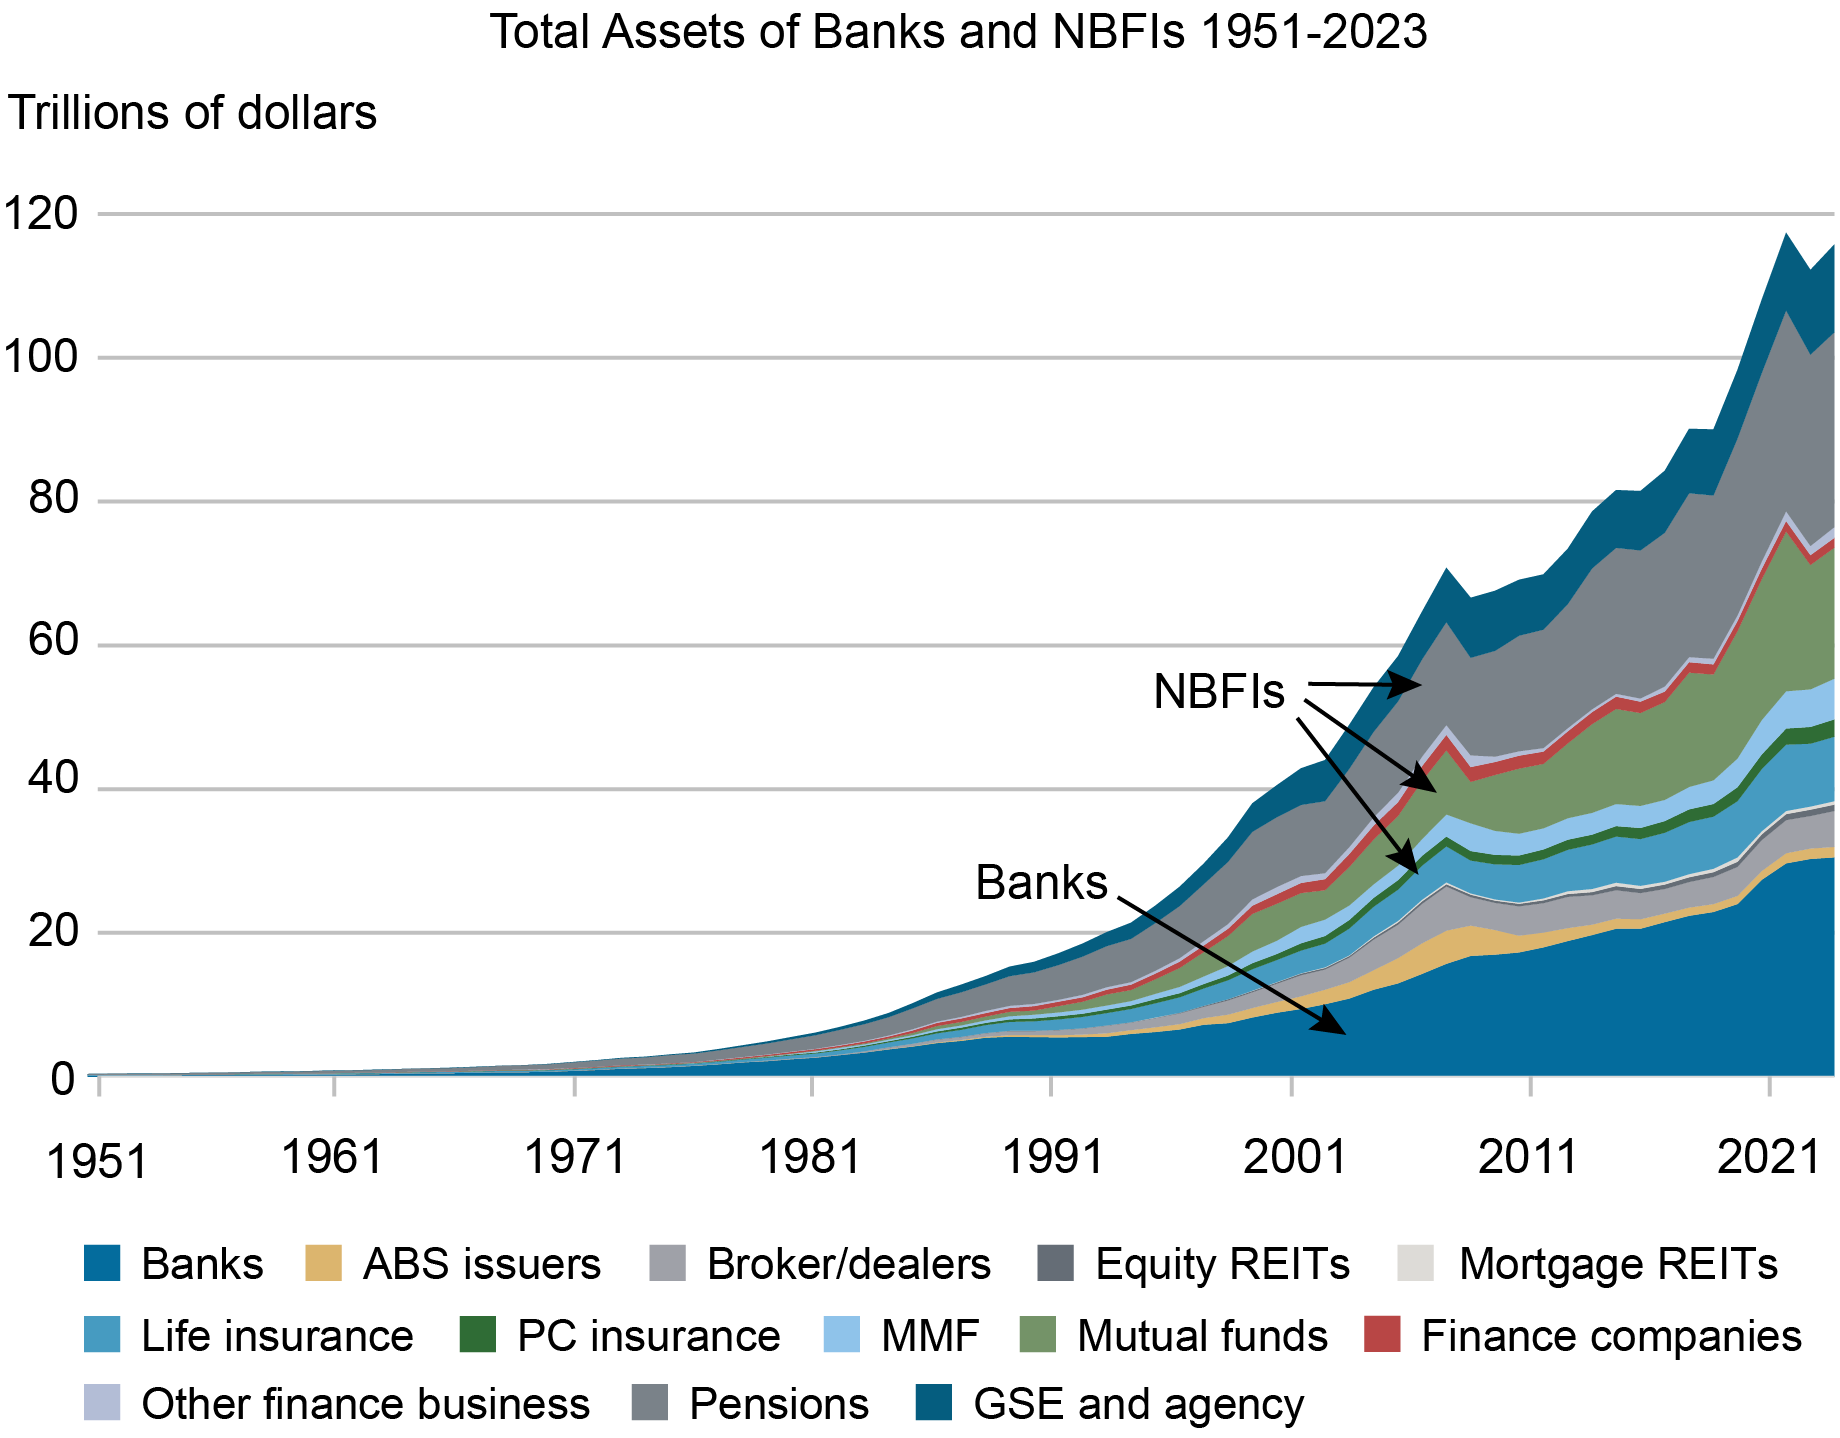 area chart tracking the growth of banks and NBFIs in trillions of dollars from 1951 through 2023, illustrating that the growth of NBFIs, such as broker/dealers, and mutual funds, have outgrown the total assets of banks.